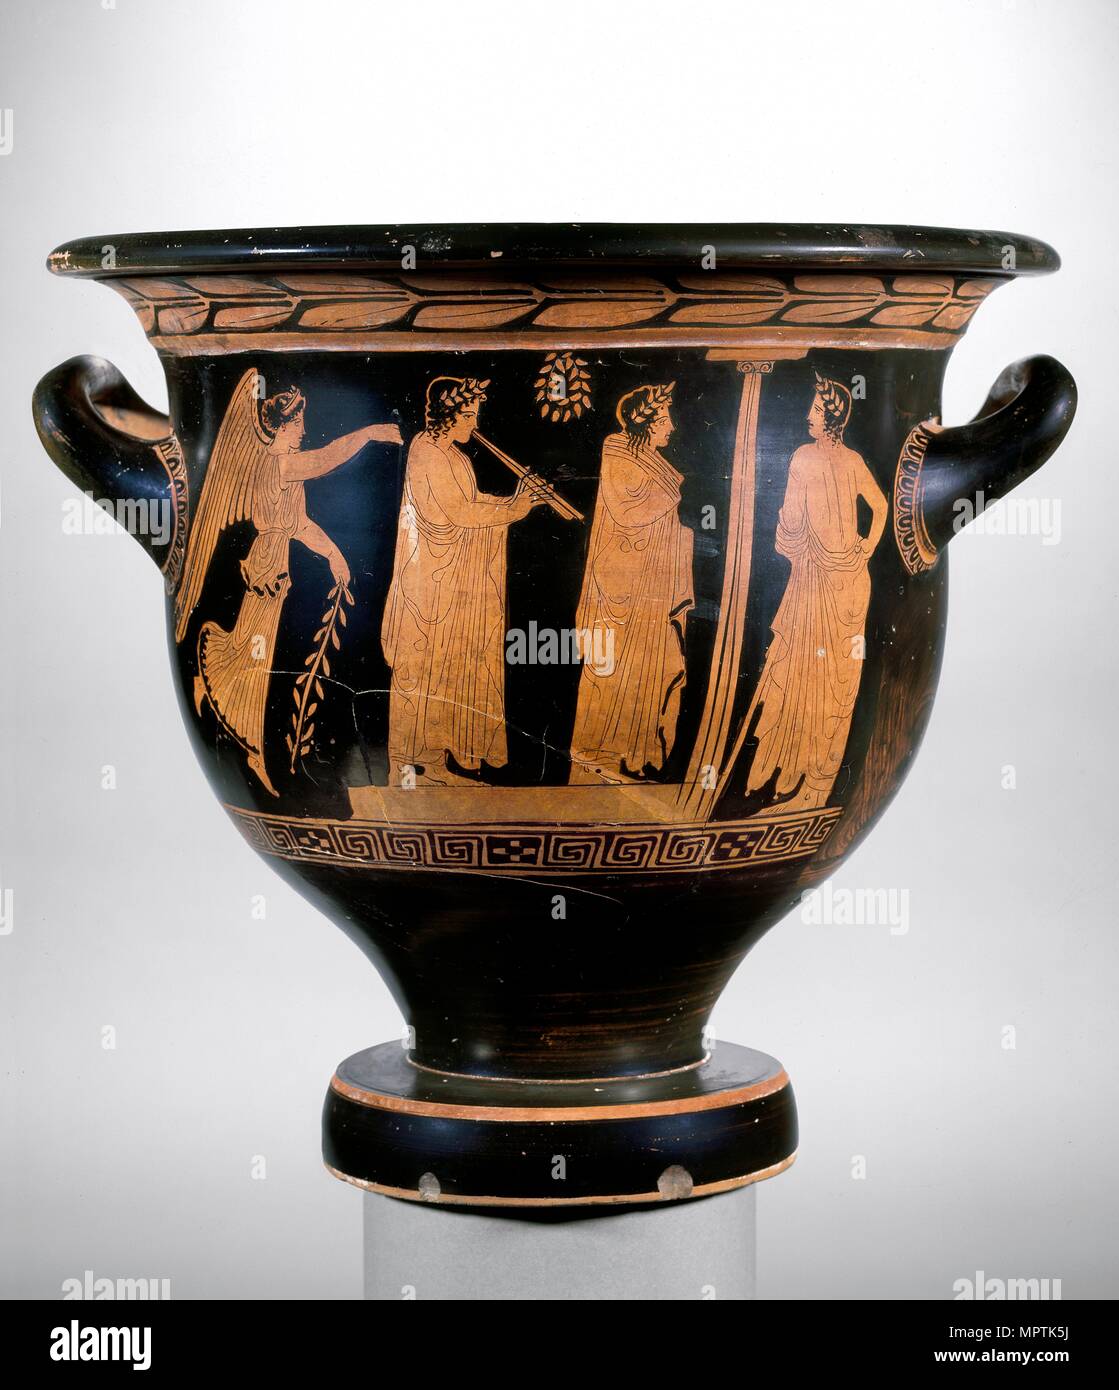 Red figure bell krater, late 5th century BC. Artist: Kadmos Painter. Stock Photo